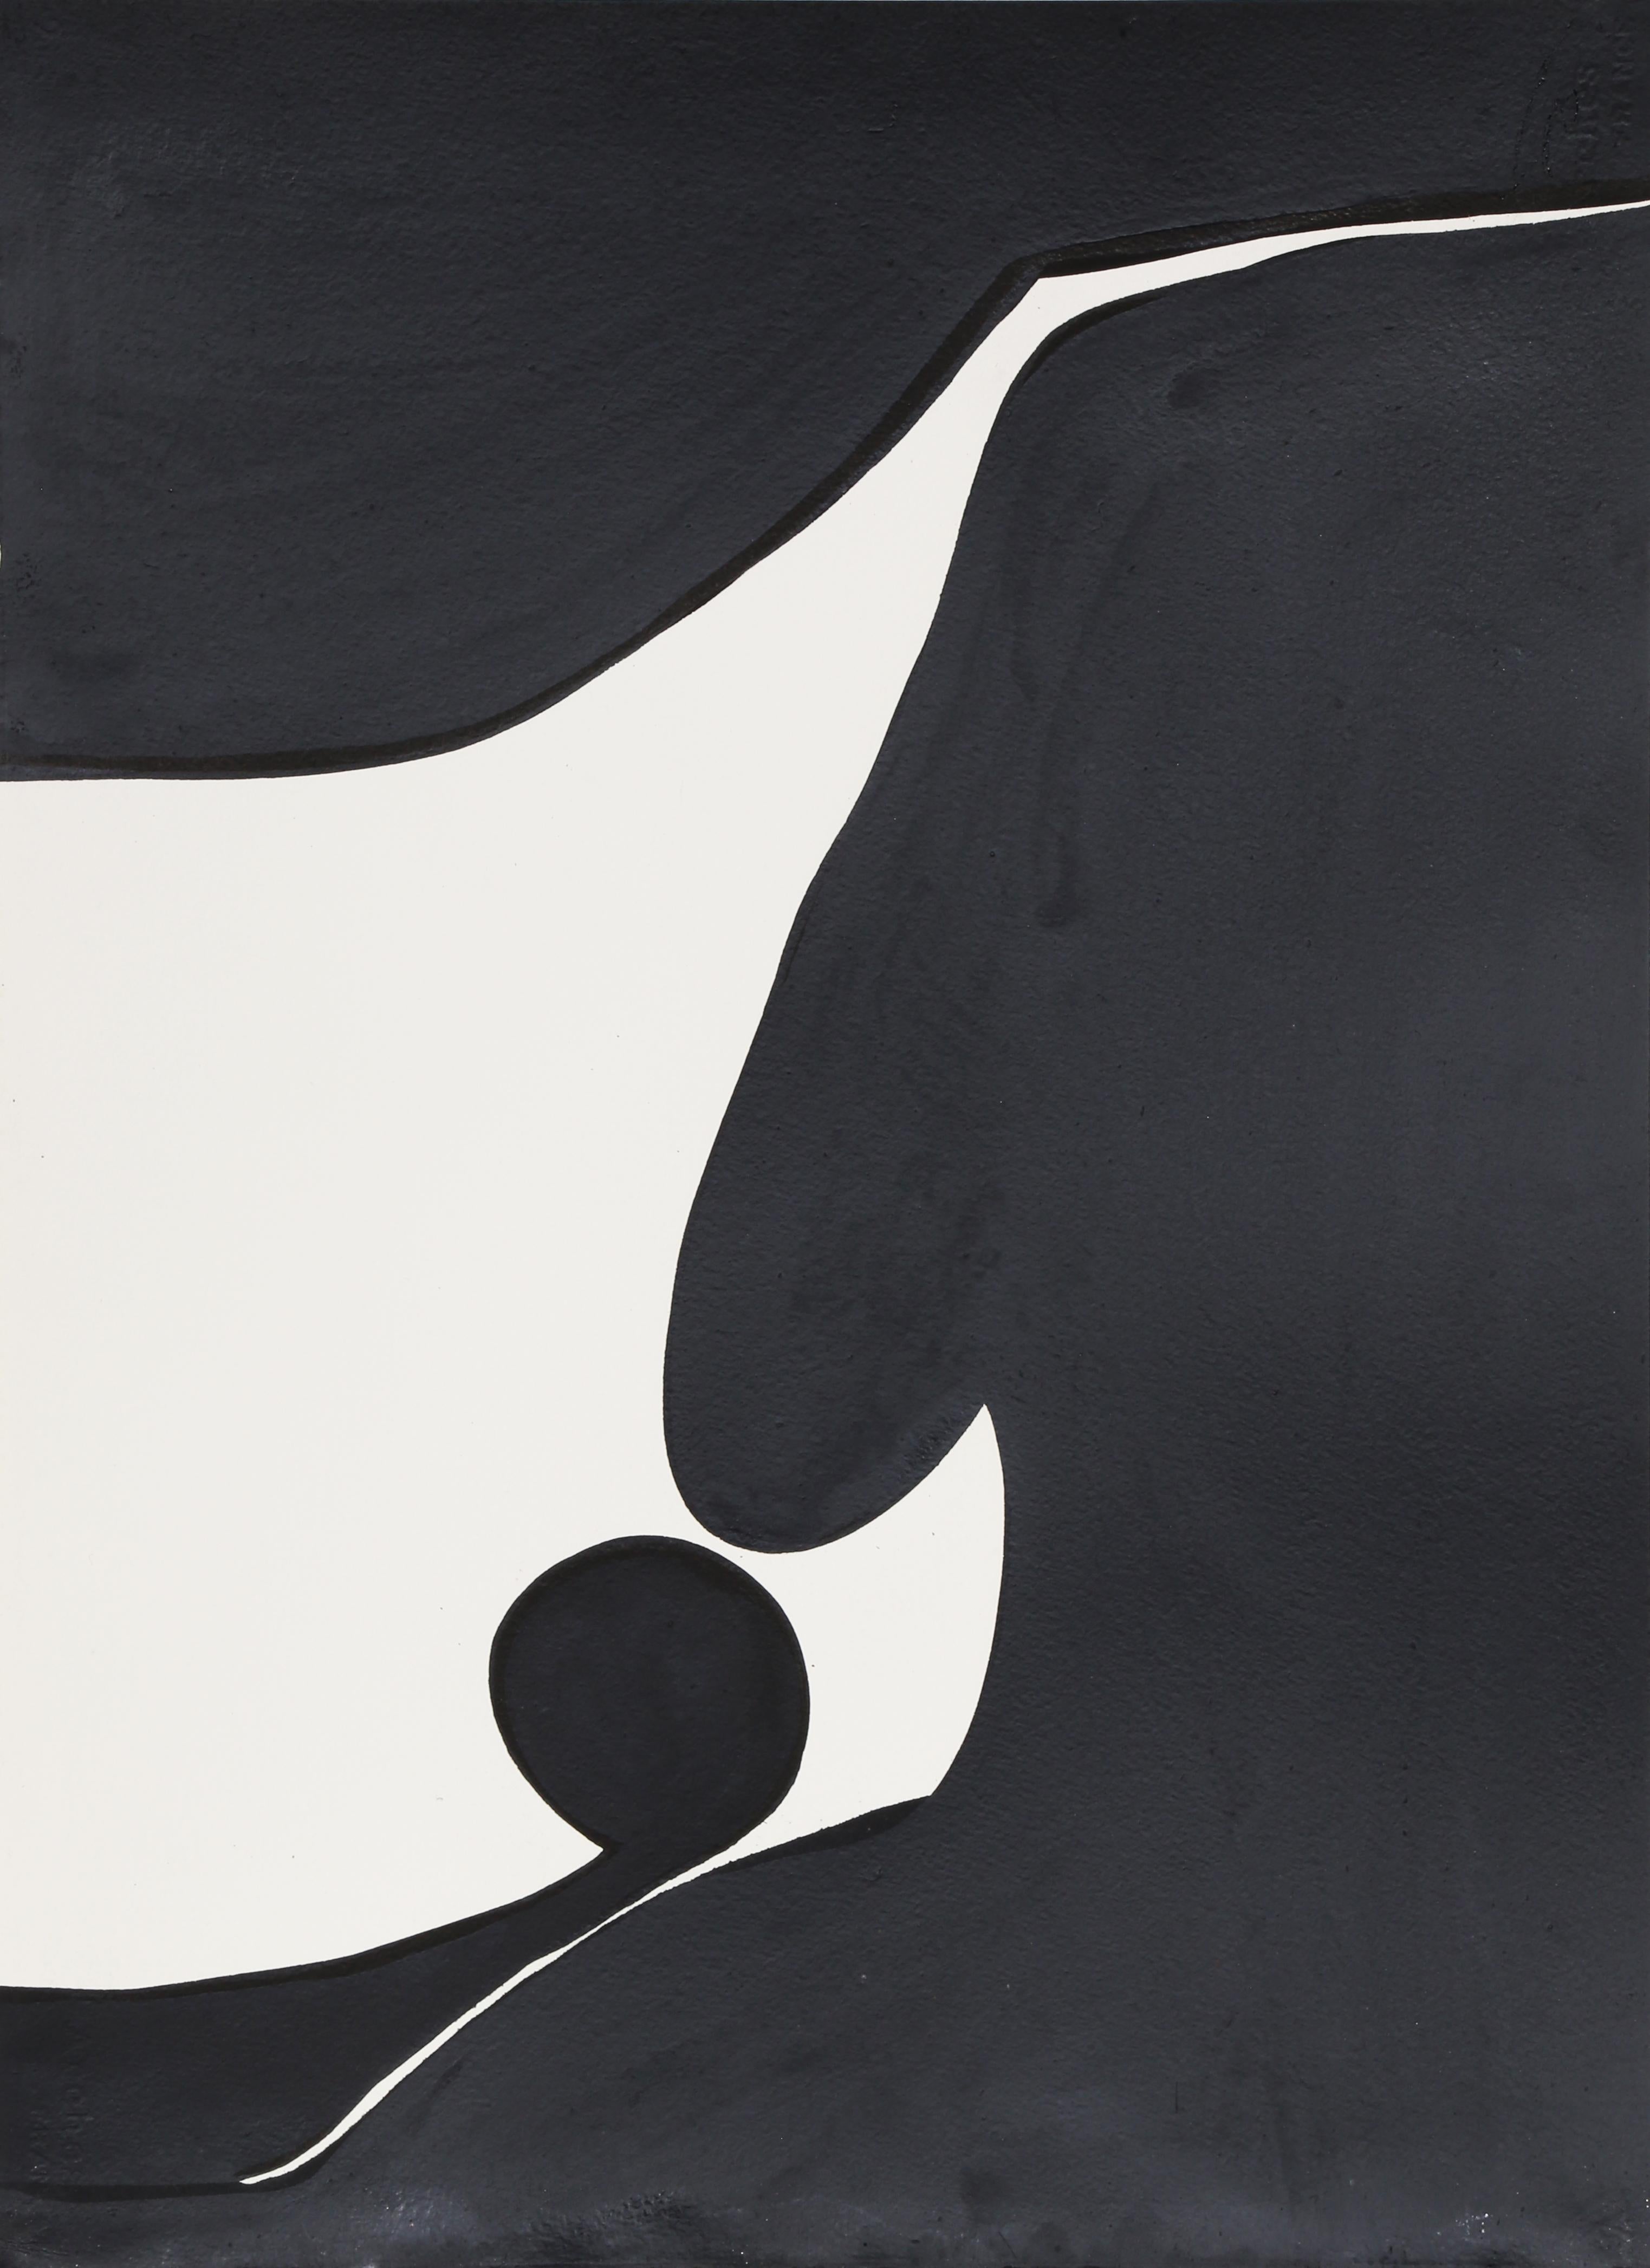 A graceful movement of black ink across a white paper background. This simple abstraction by Geri Taper is signed, titled, and dated in pencil.

Black and White
Geri Taper, American (1929–2004)
Date: 1974
Ink on Arches, signed, titled and dated in